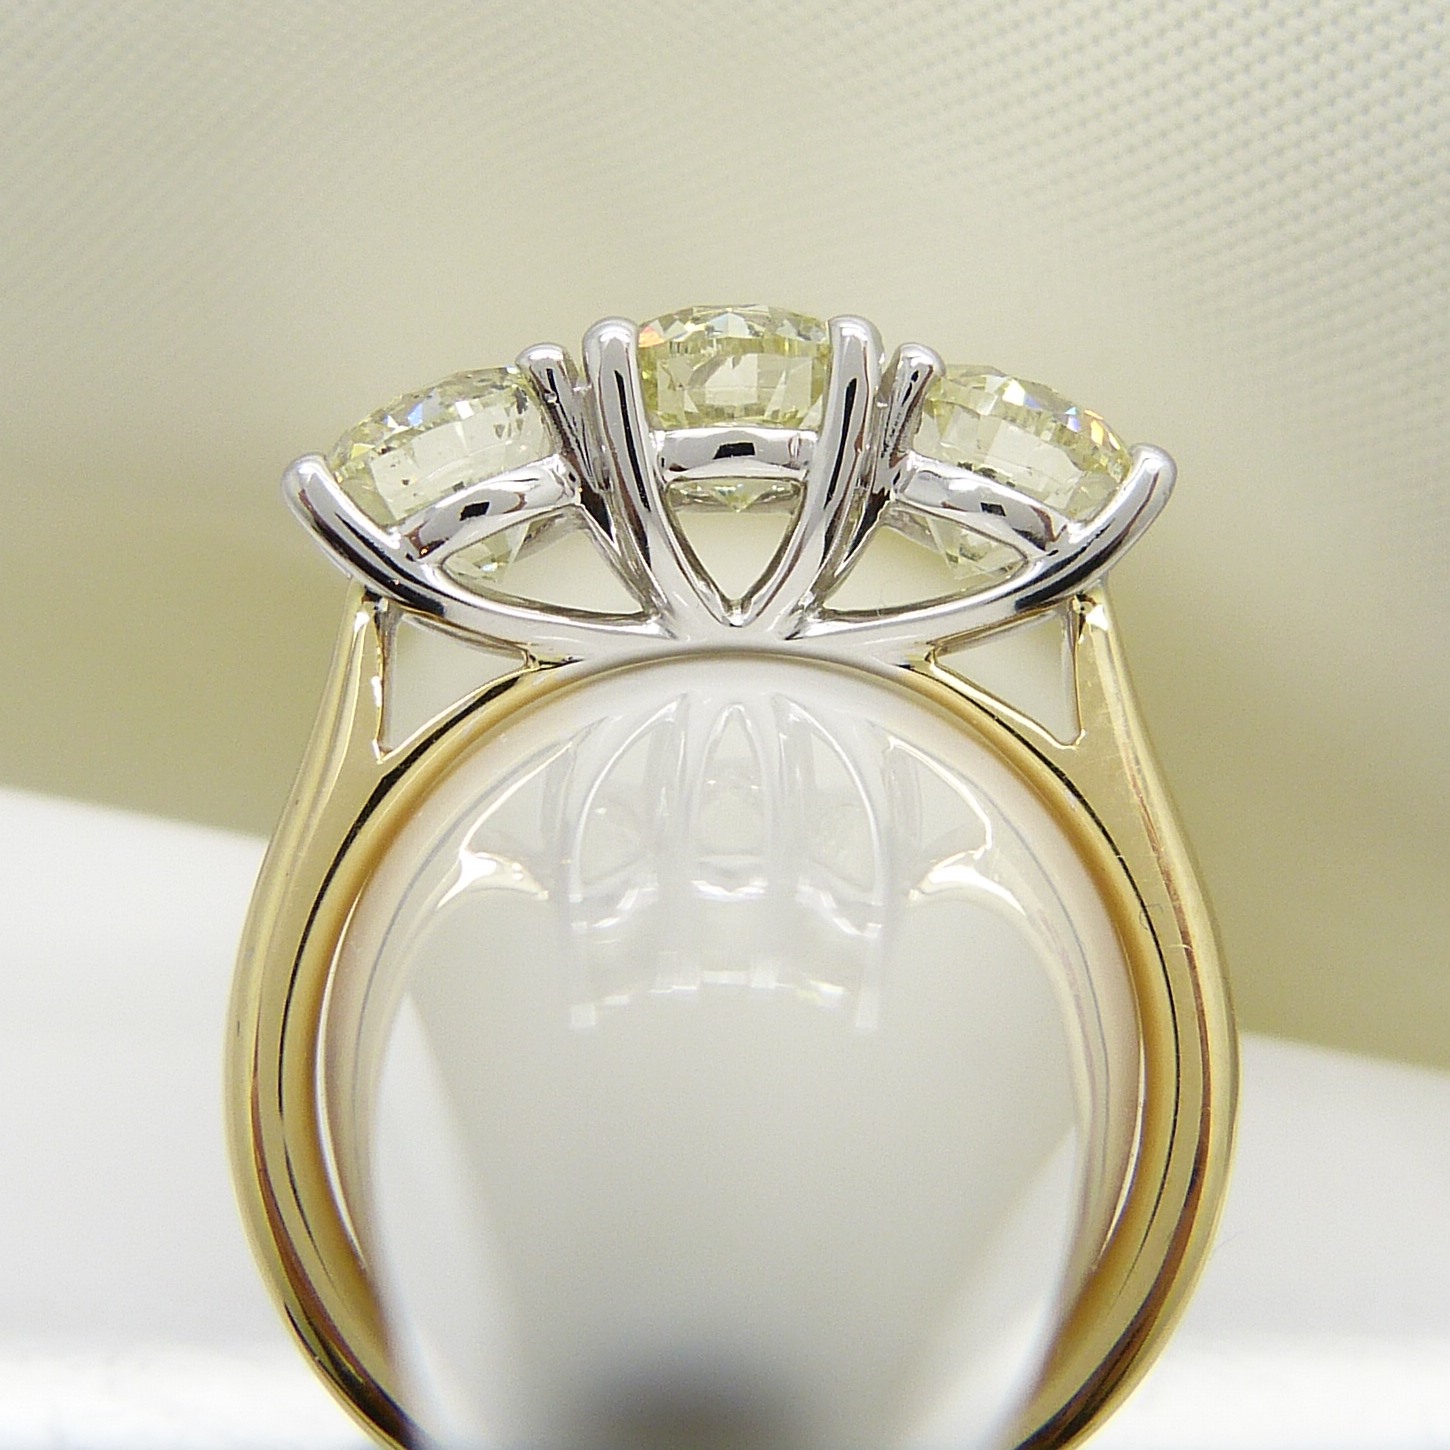 A stunning WGI certificated 3.11 carat diamond 3-stone ring in 18ct yellow and white gold - Image 6 of 8